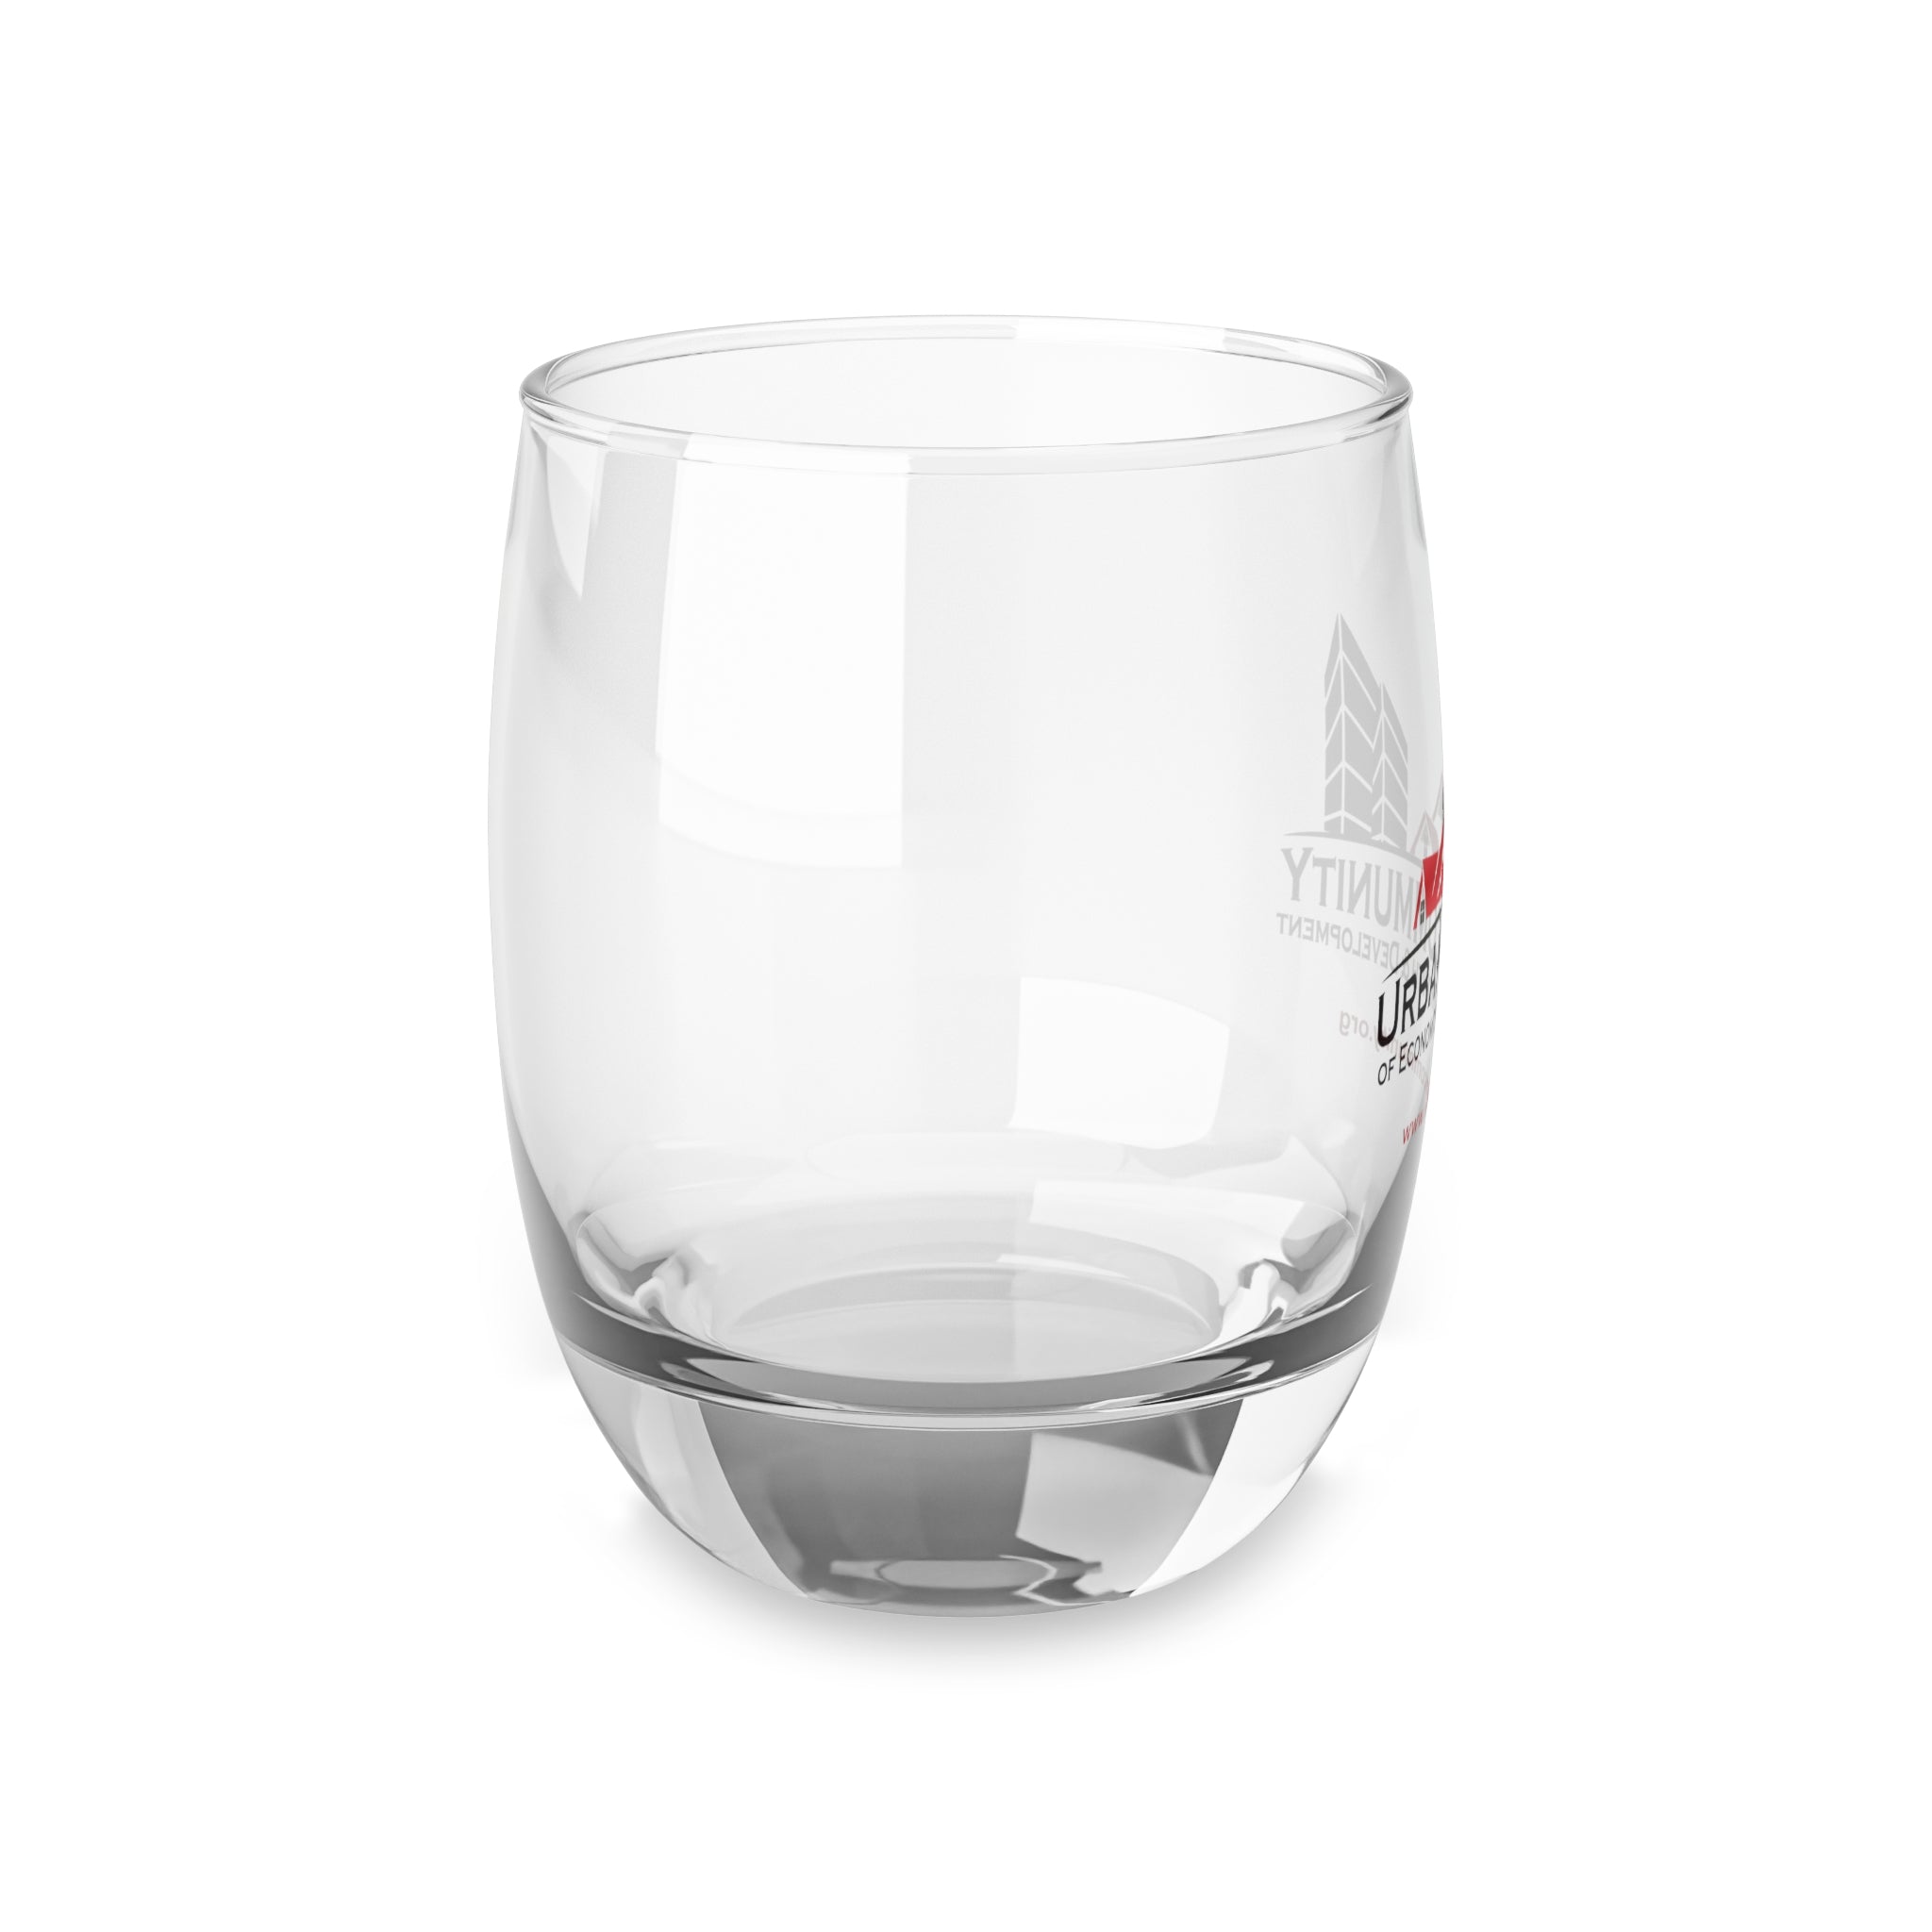 Our signature Whiskey Glass